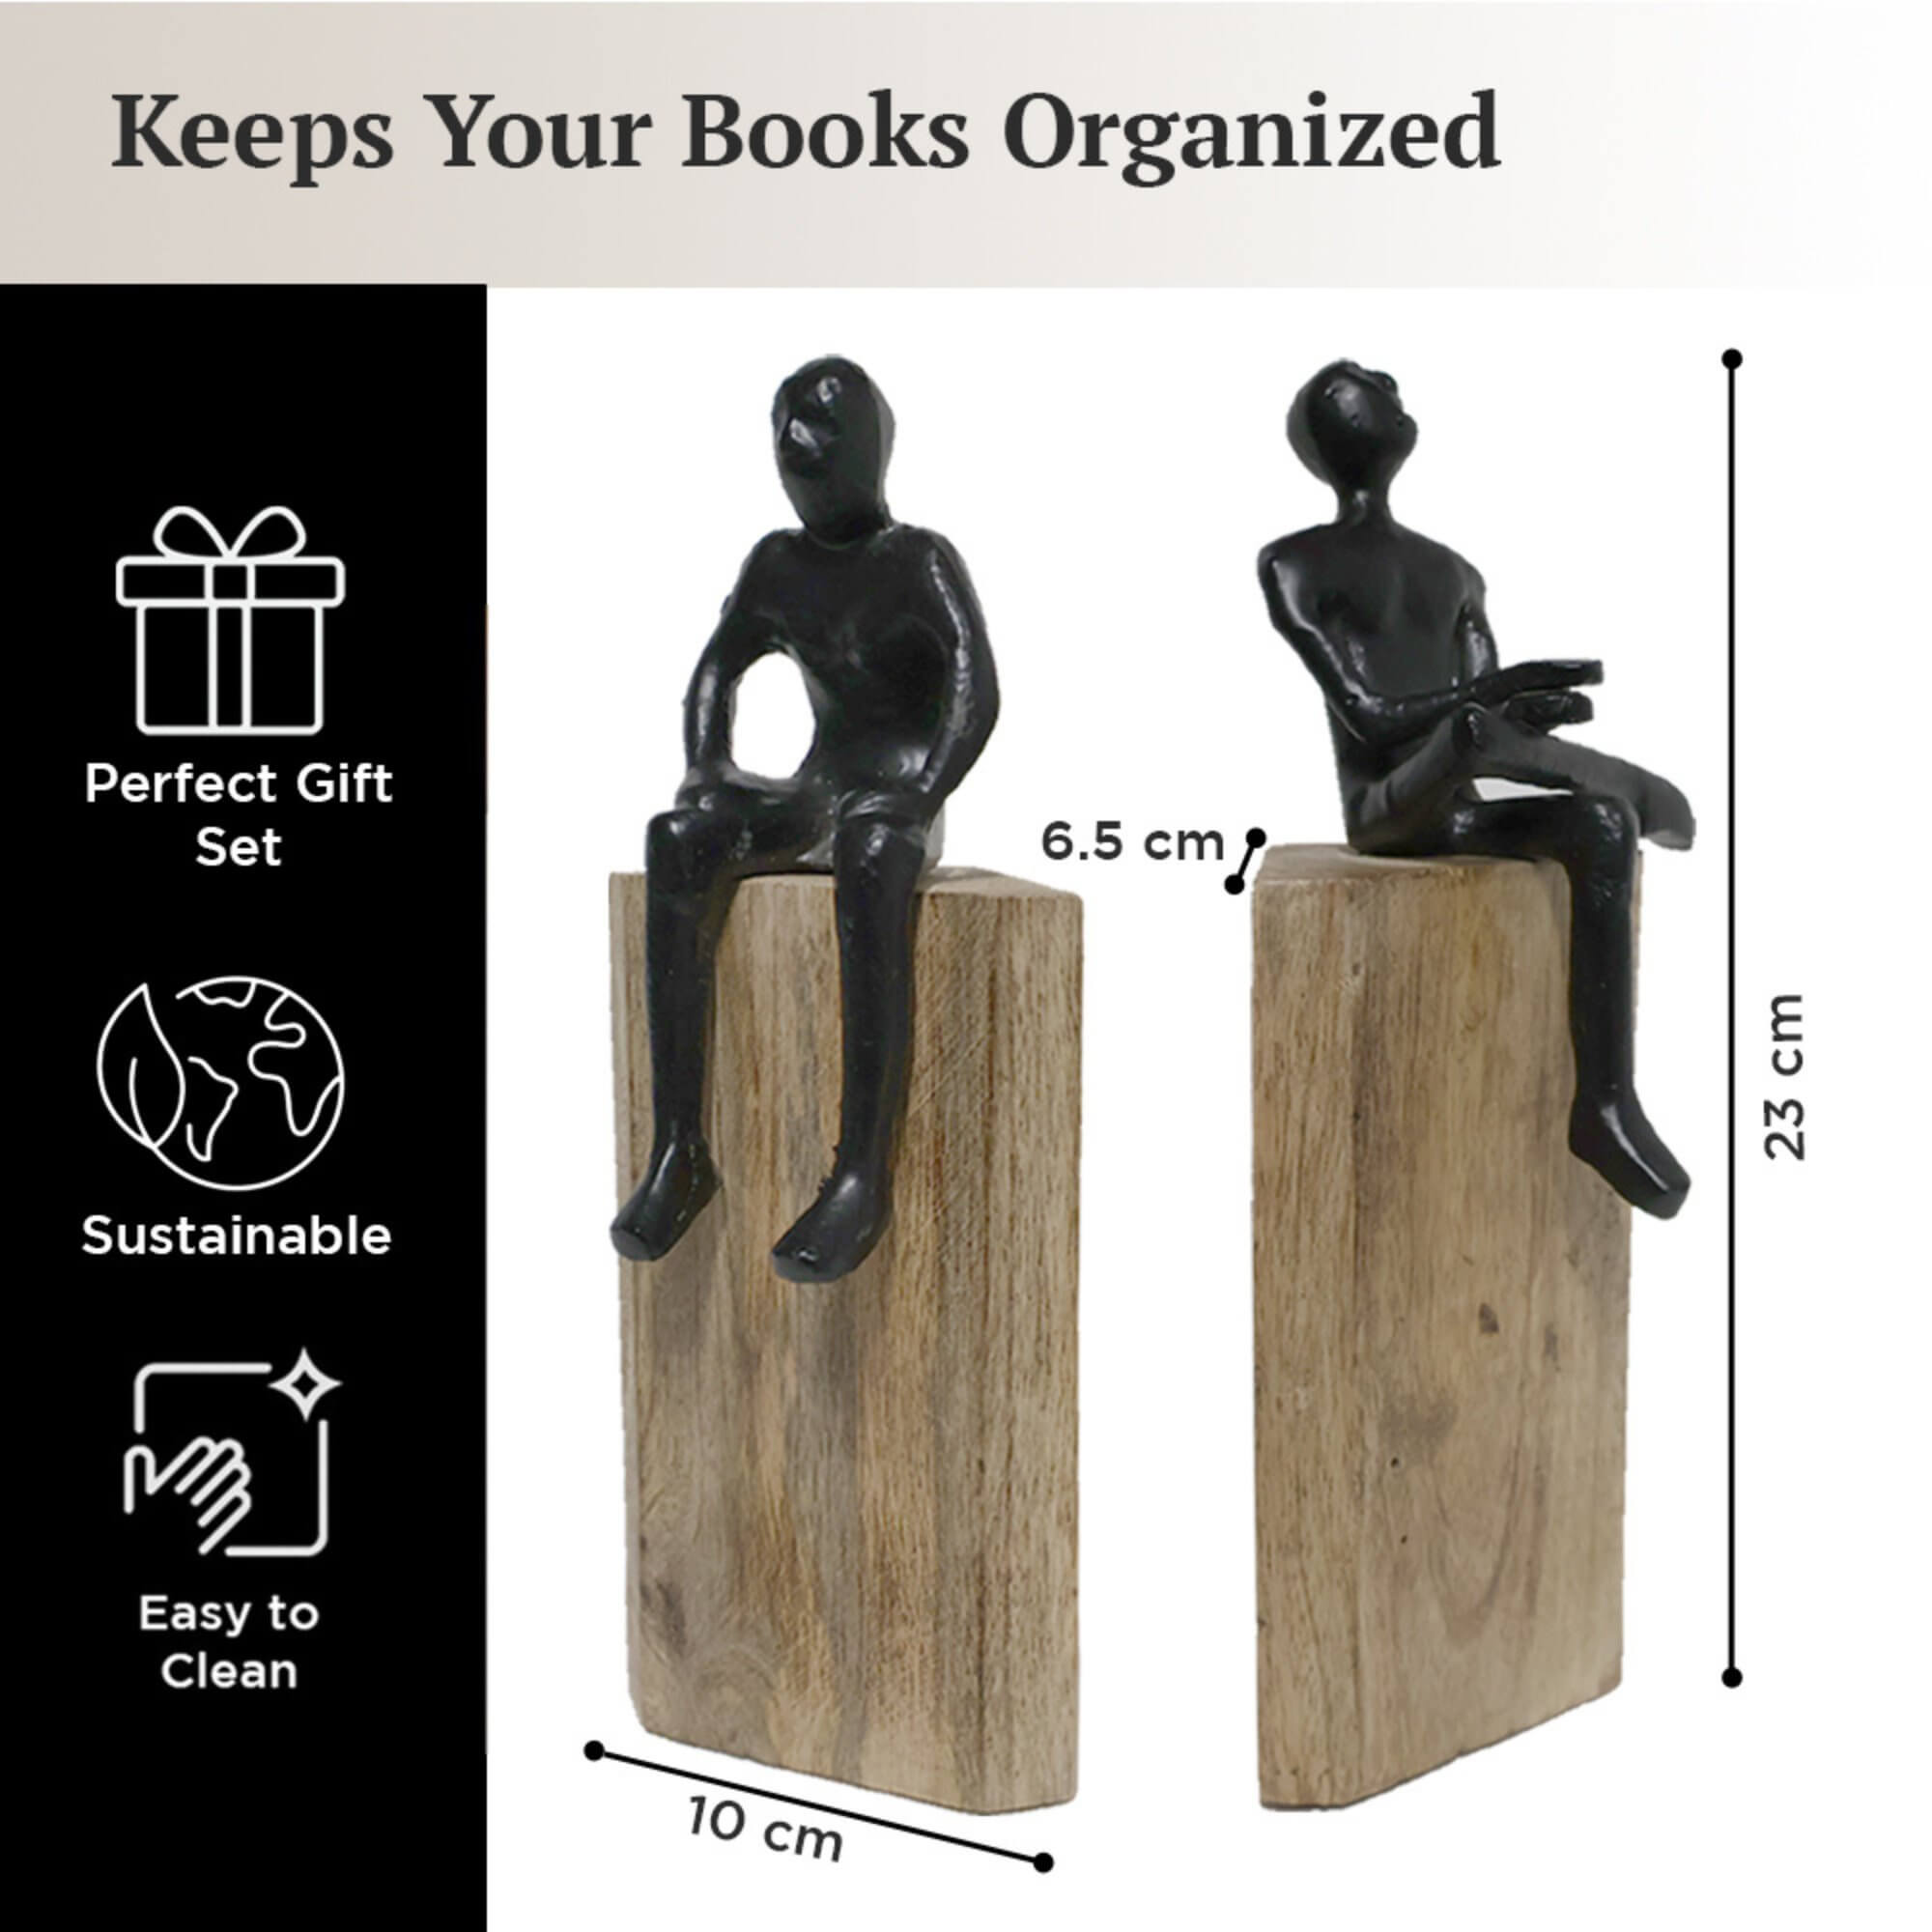 Mango Wood Decorative Heavy Duty Bookends with Non-Skids for Books